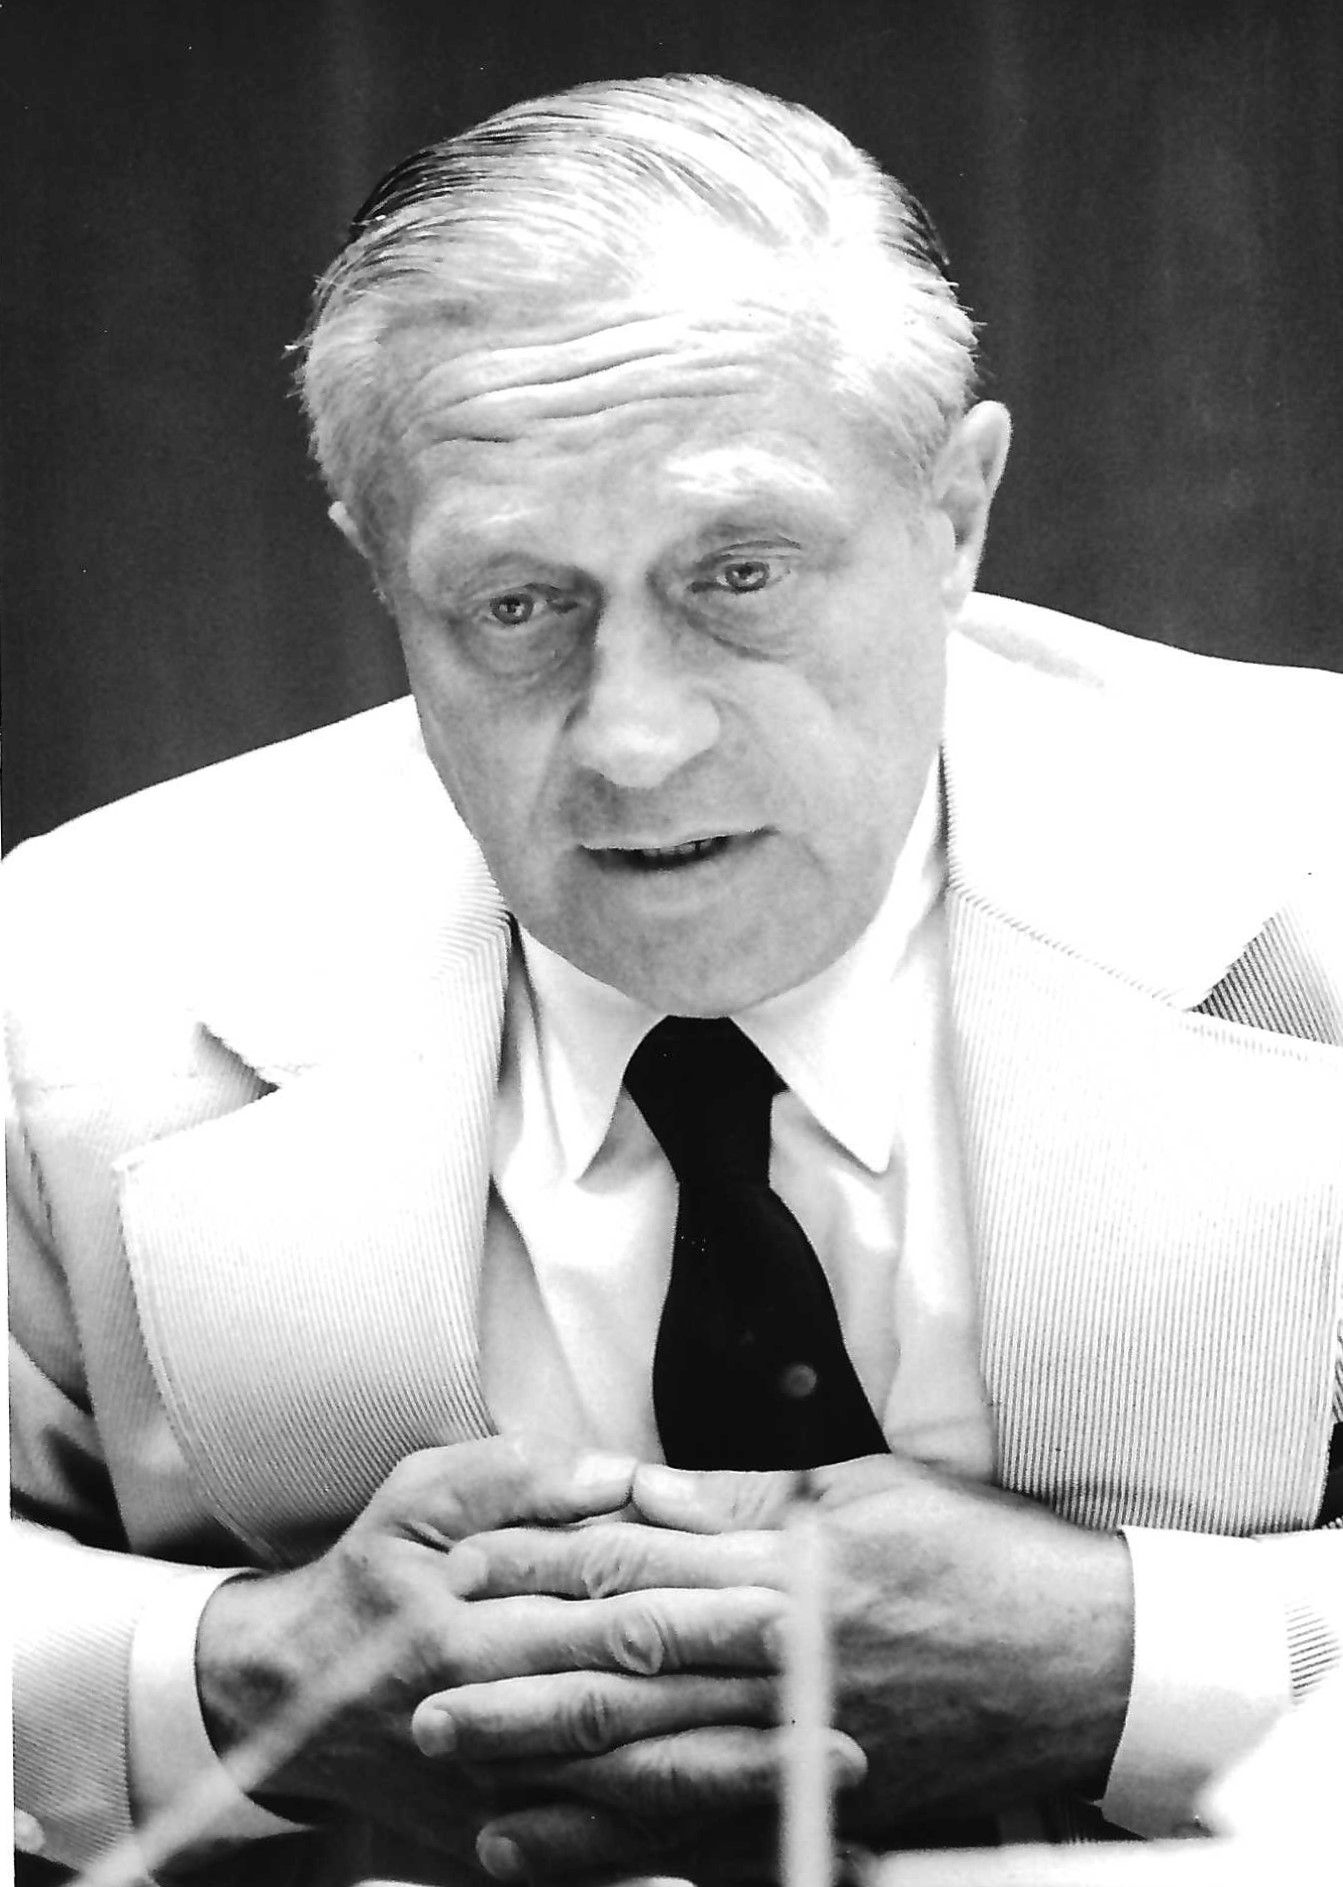 Black and White Picture of the late CHARLES O. BLAISDELL